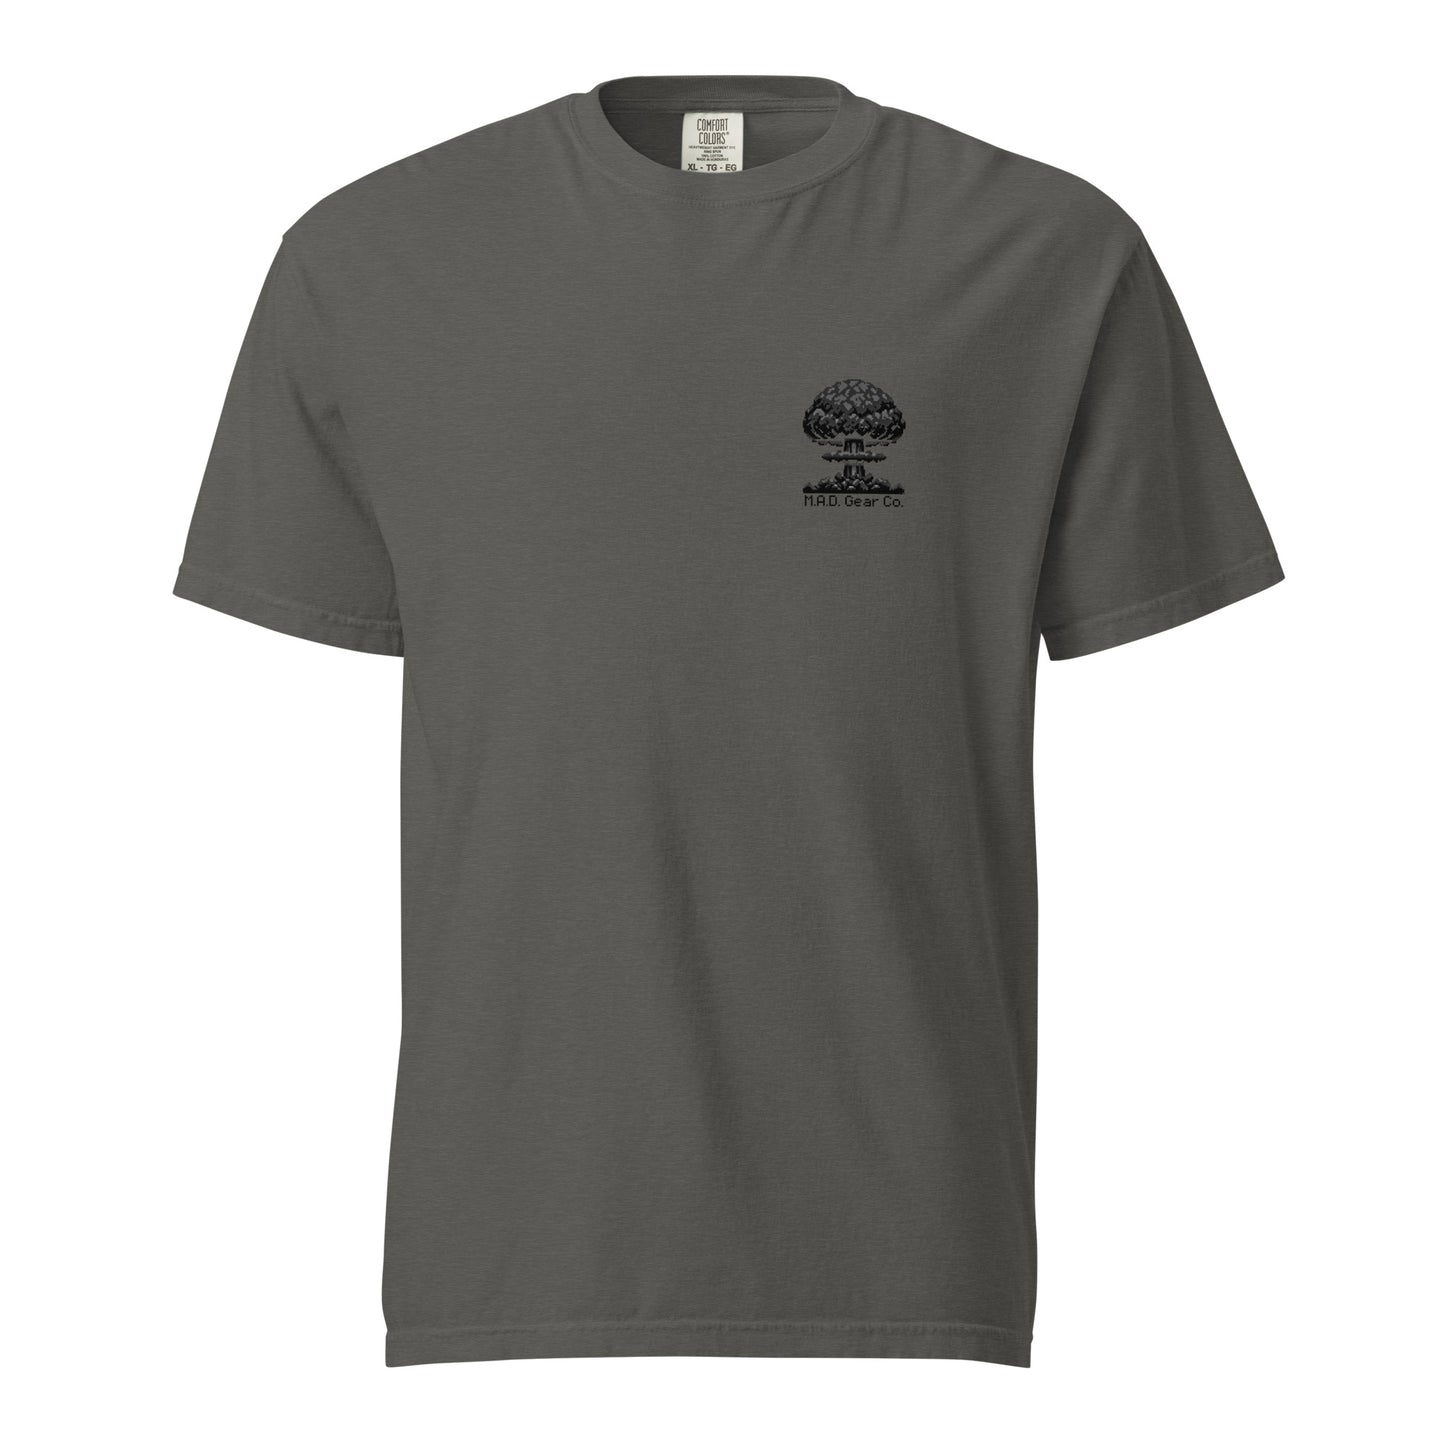 Premium Blacked Out Shirt